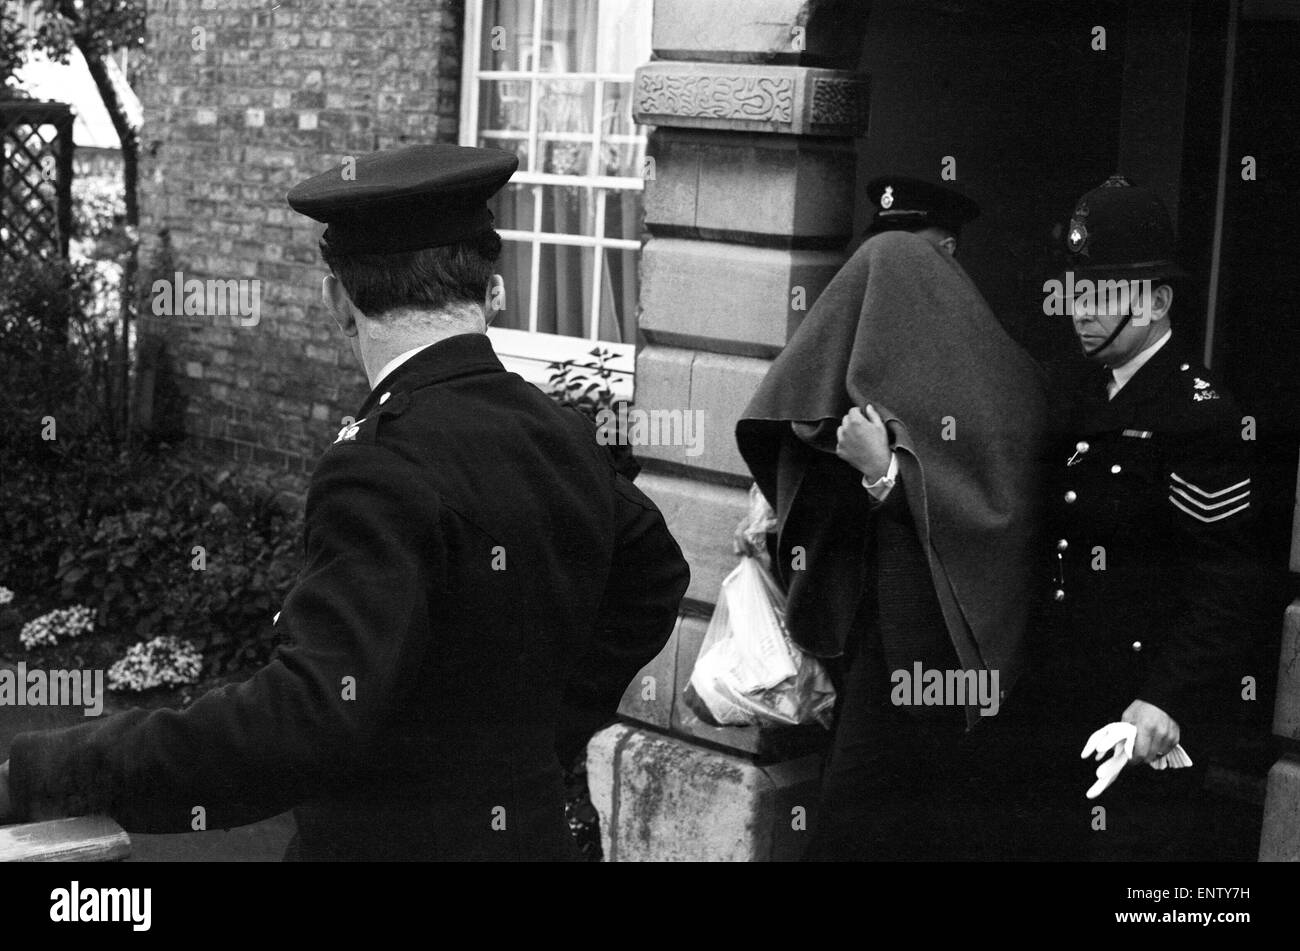 Thomas Wisbey, Great Train Robber, is escorted from Linslade Court by police officers, 12th September 1963. In 1965 Thomas Wisbey was jailed for 30 years for his part in the great £2,750,000 raid. Wisbey, who was paroled in 1976. Stock Photo